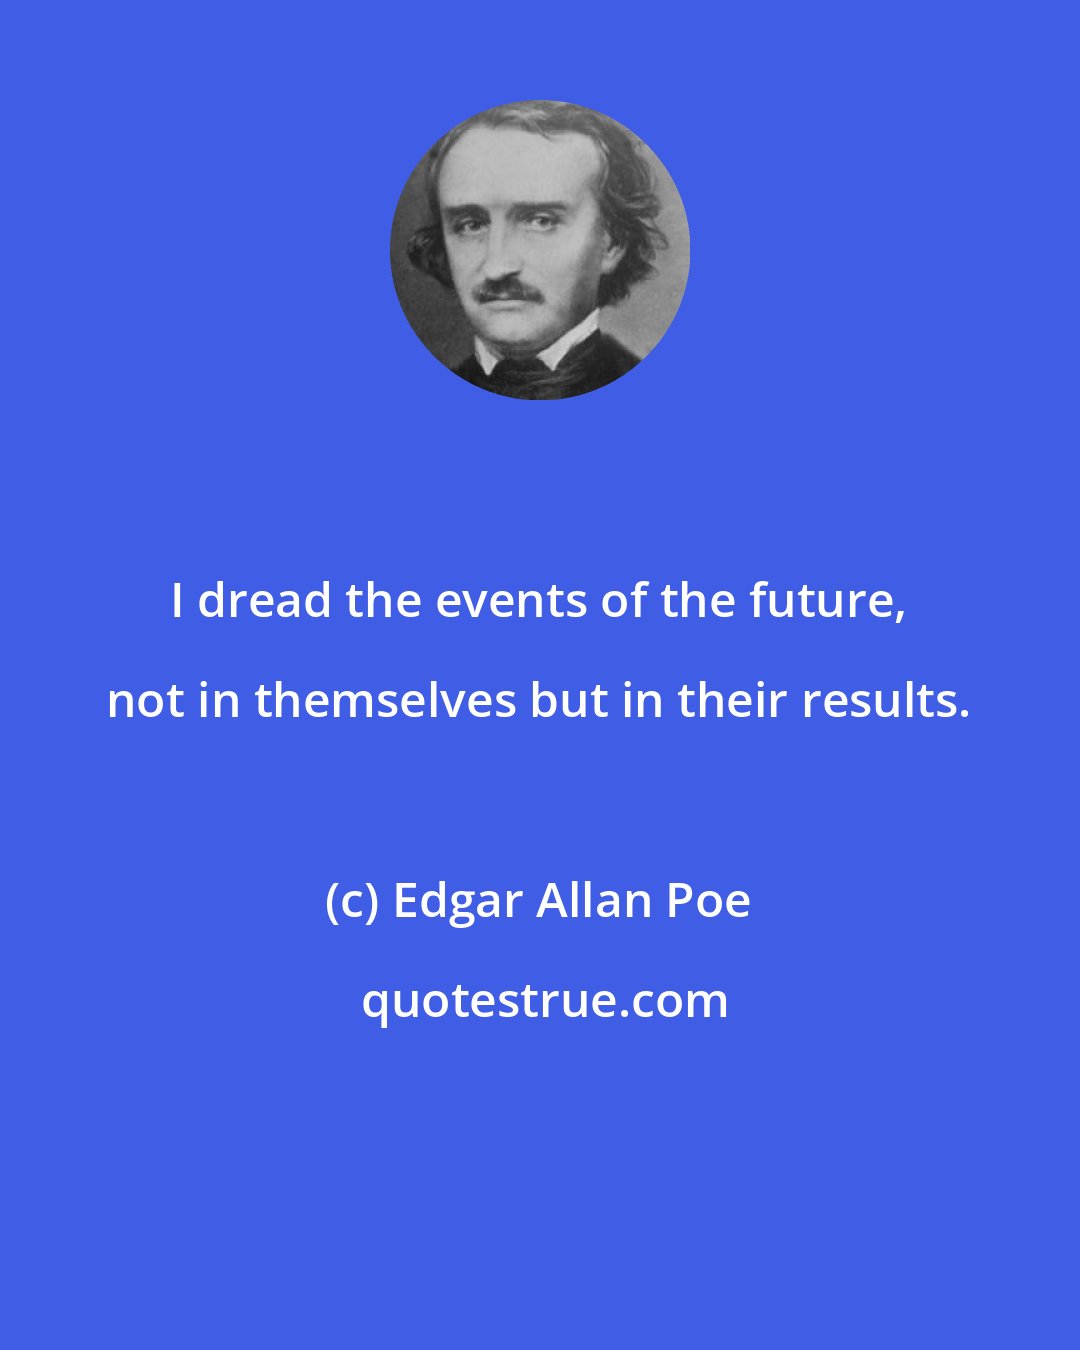 Edgar Allan Poe: I dread the events of the future, not in themselves but in their results.